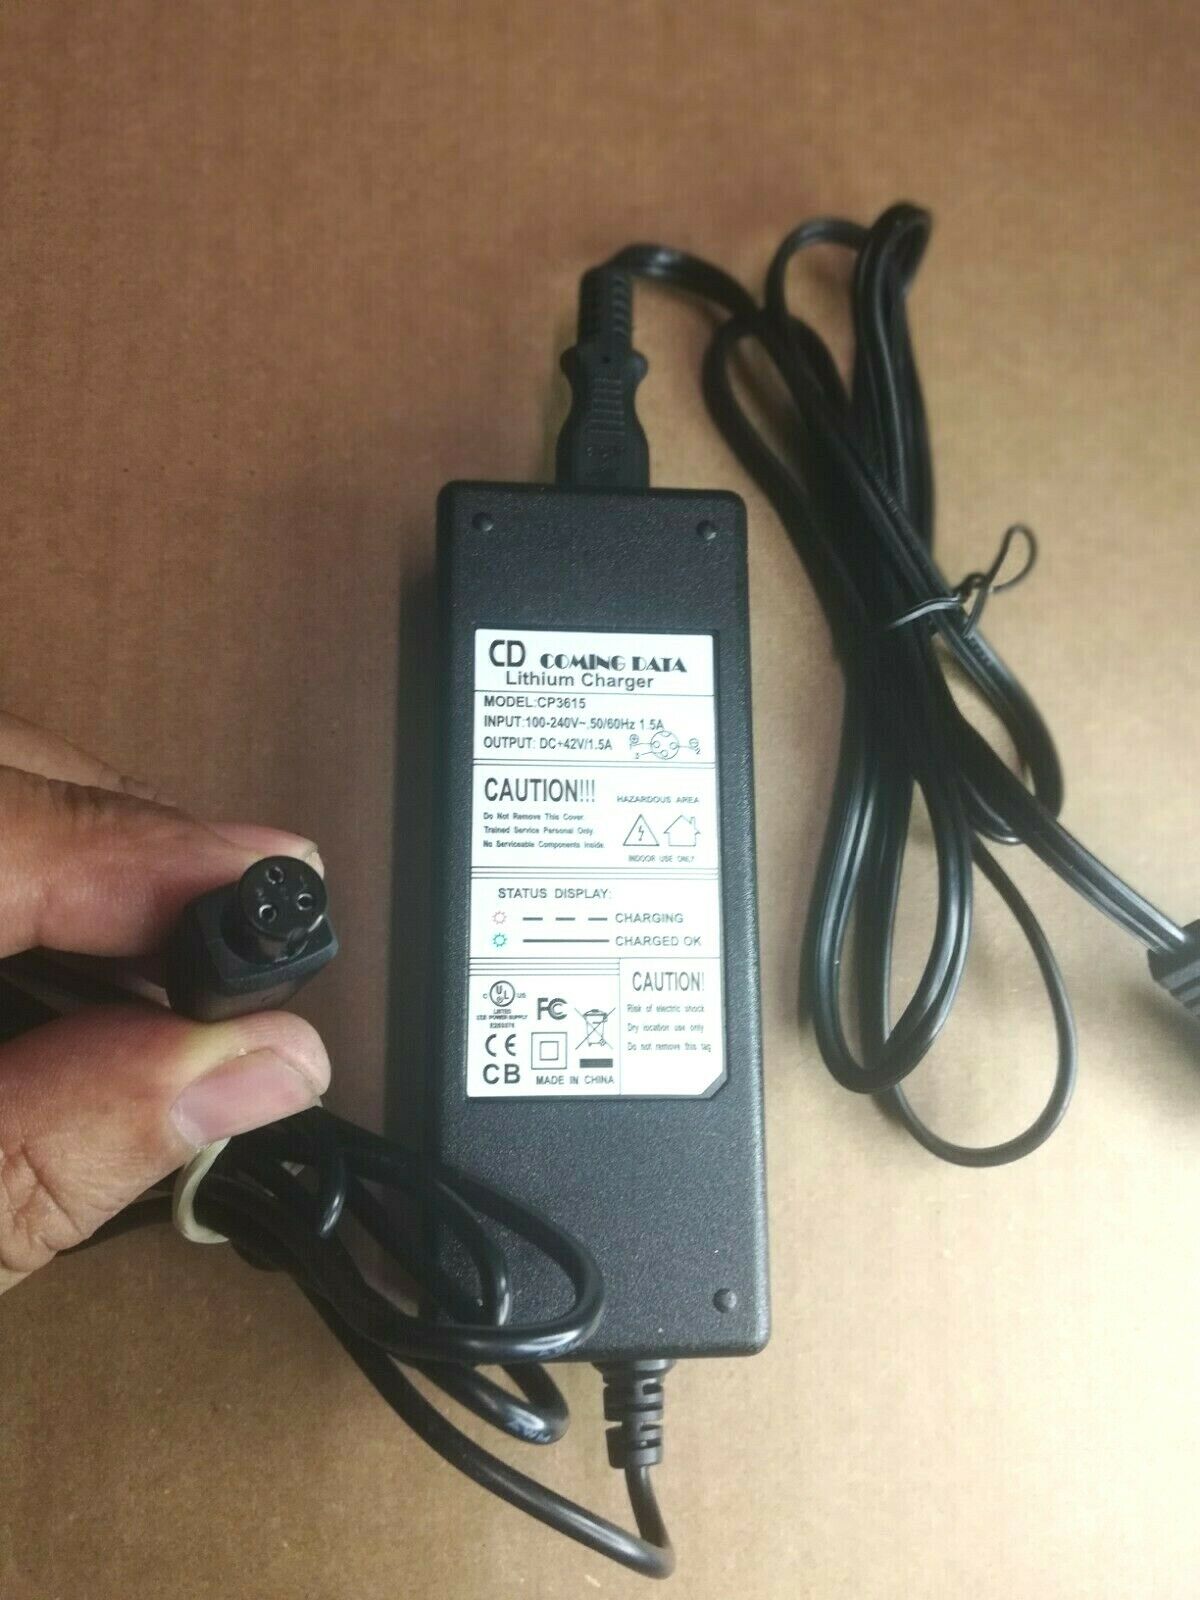 COMING DATA CD LITHIUM CHARGER CP3615 Input 100-240v .50/ 42V/1.5A Size: 3 pin Model: CP3615 Type: 42V/1.5A Color - Click Image to Close